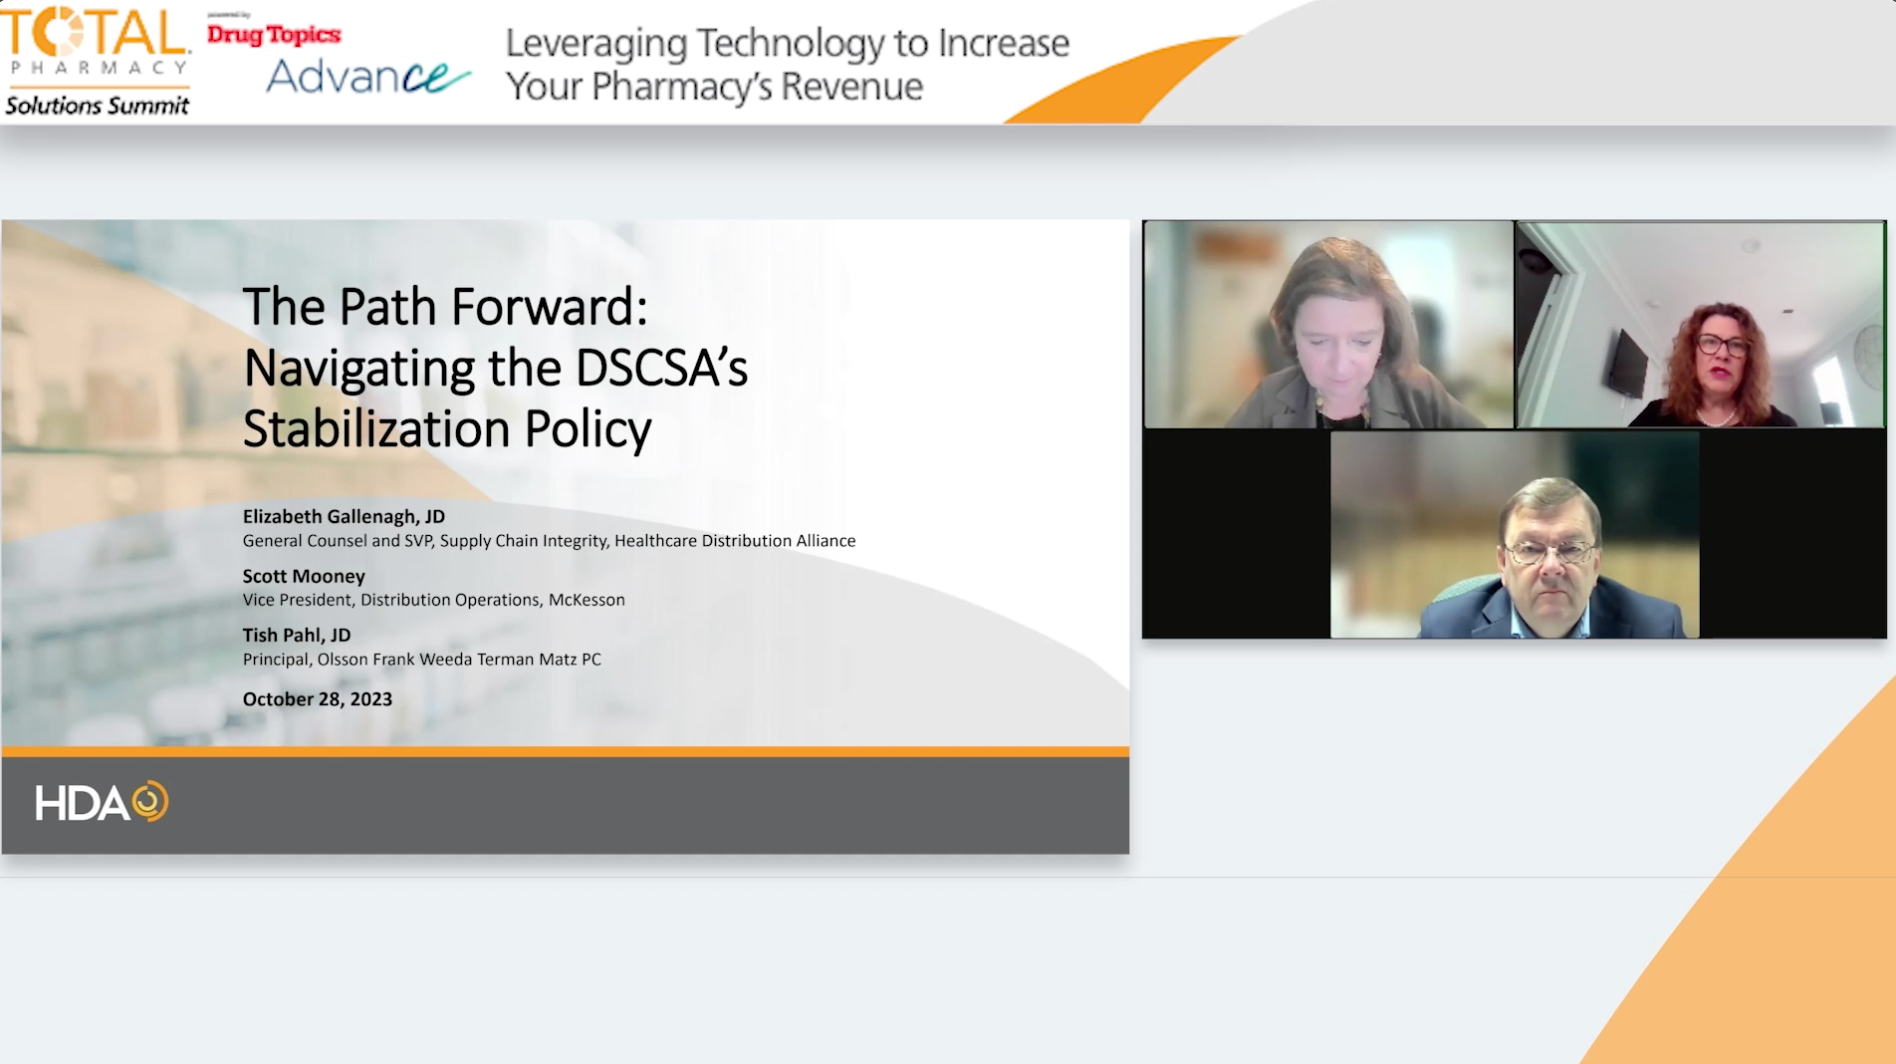 The Path Forward: Navigating the DSCSA Stabilization Policy